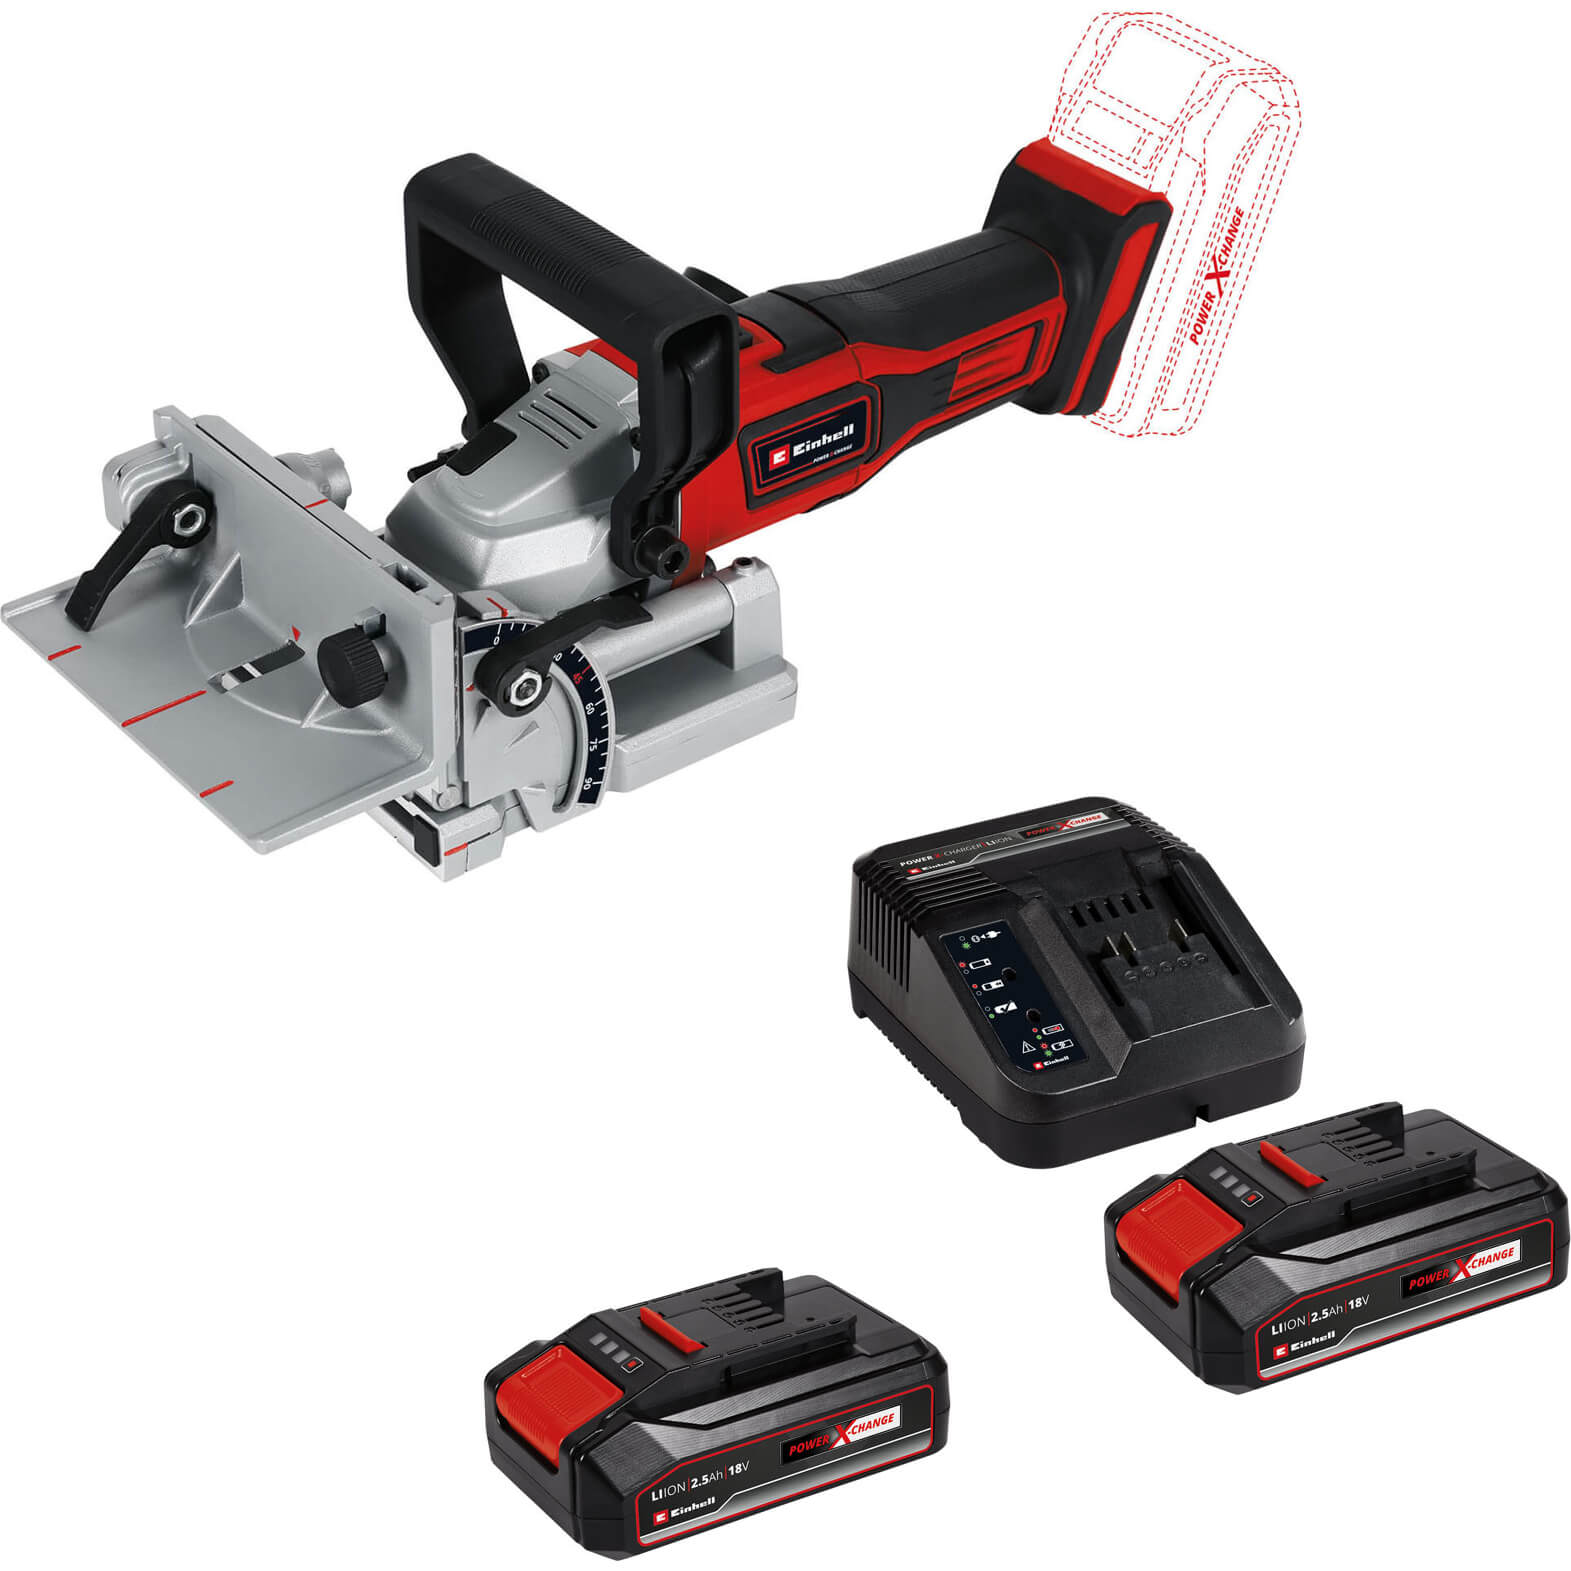 Image of Einhell TE-BJ 18 Li 18v Cordless Biscuit Jointer 2 x 2.5ah Li-ion Charger No Case